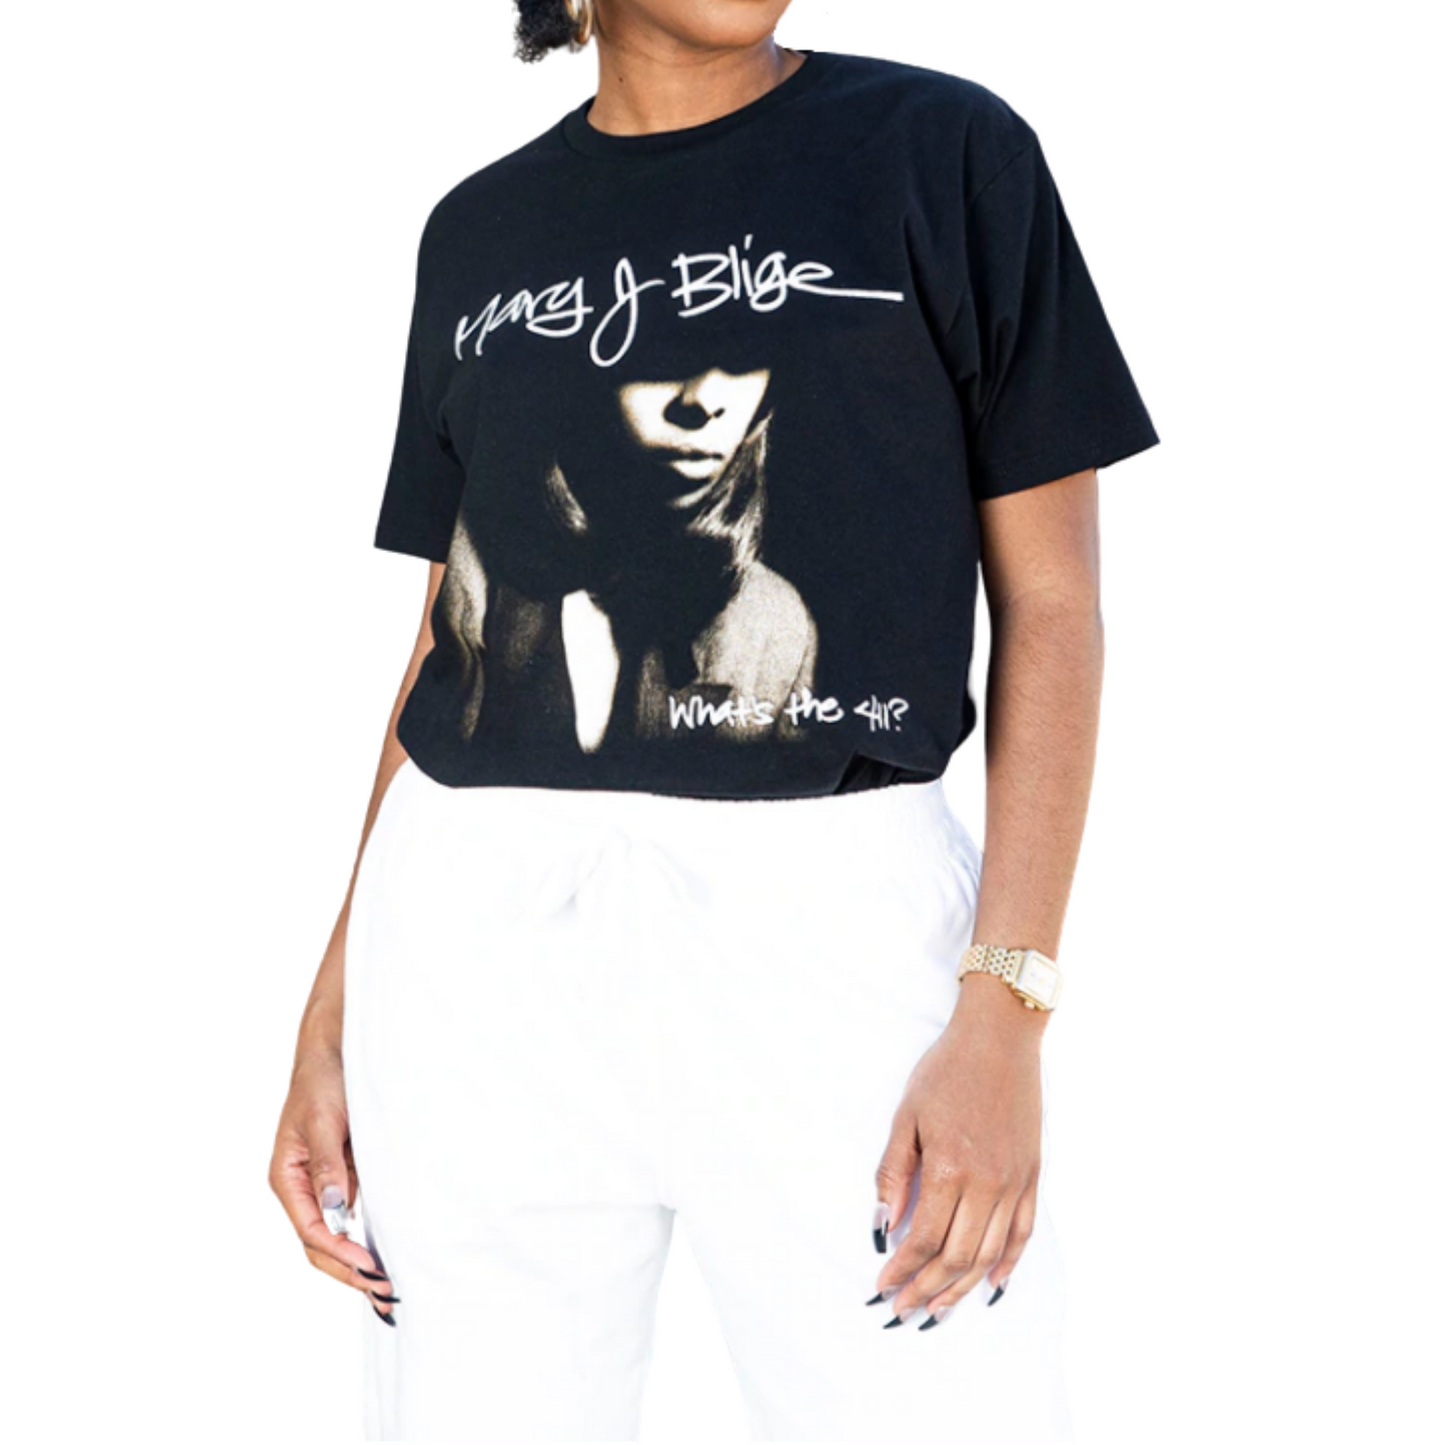 Mary J. Blige 411 Album Cover Vintage Style Graphic T-Shirt